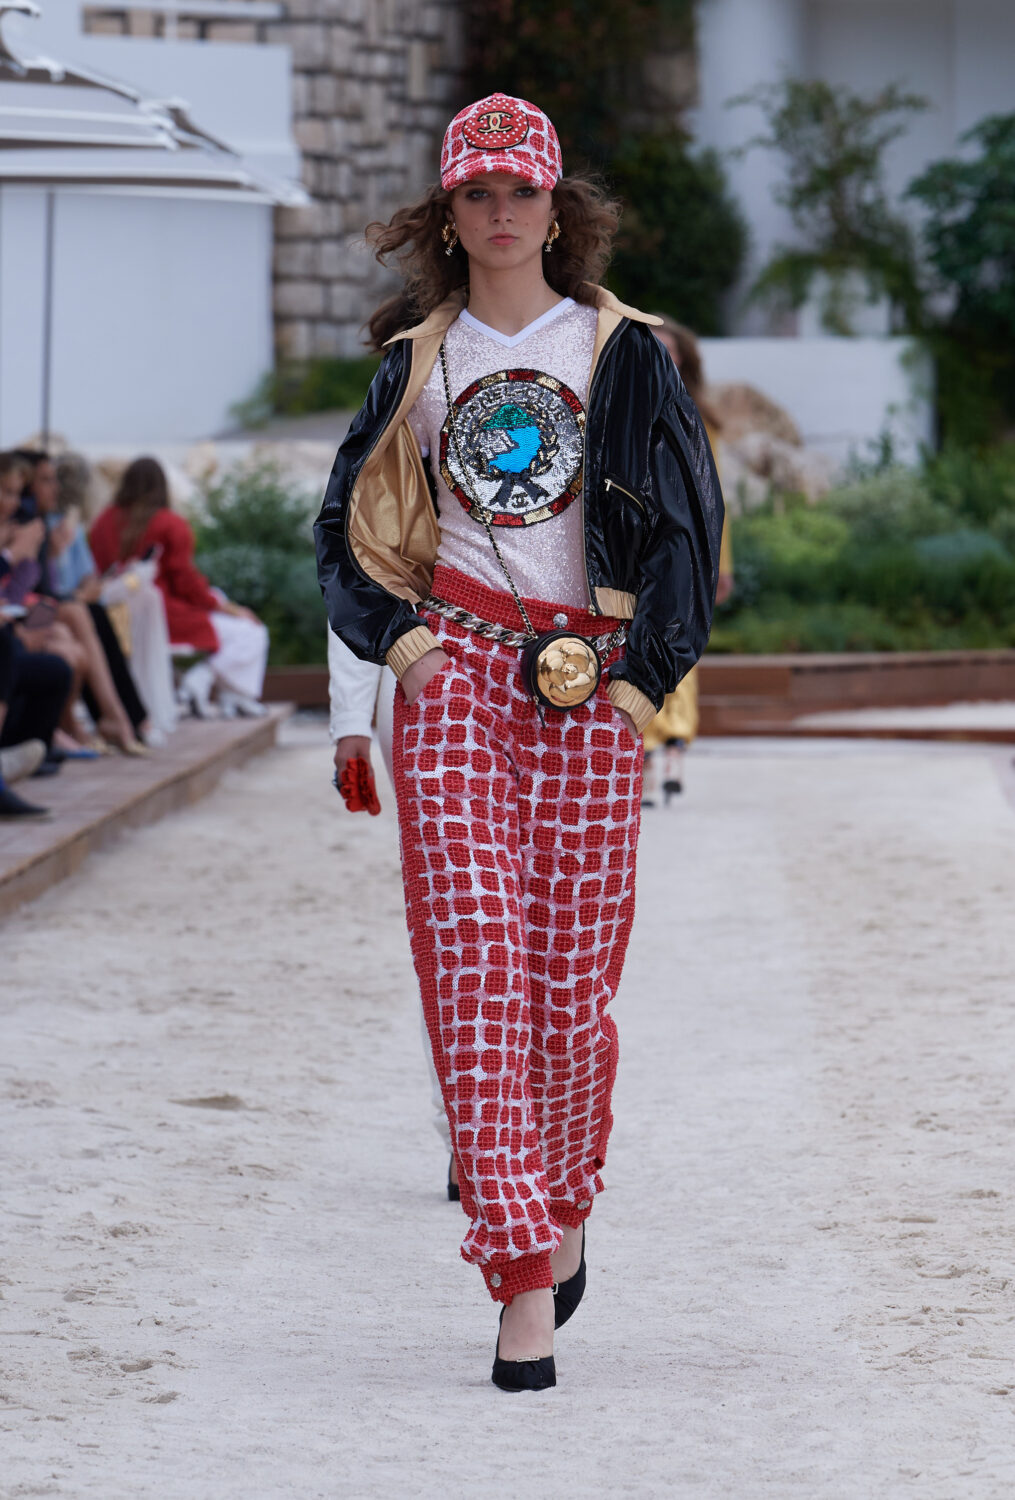 Chanel's New Cruise 2023/24 Collection Has the Perfect Outfit for